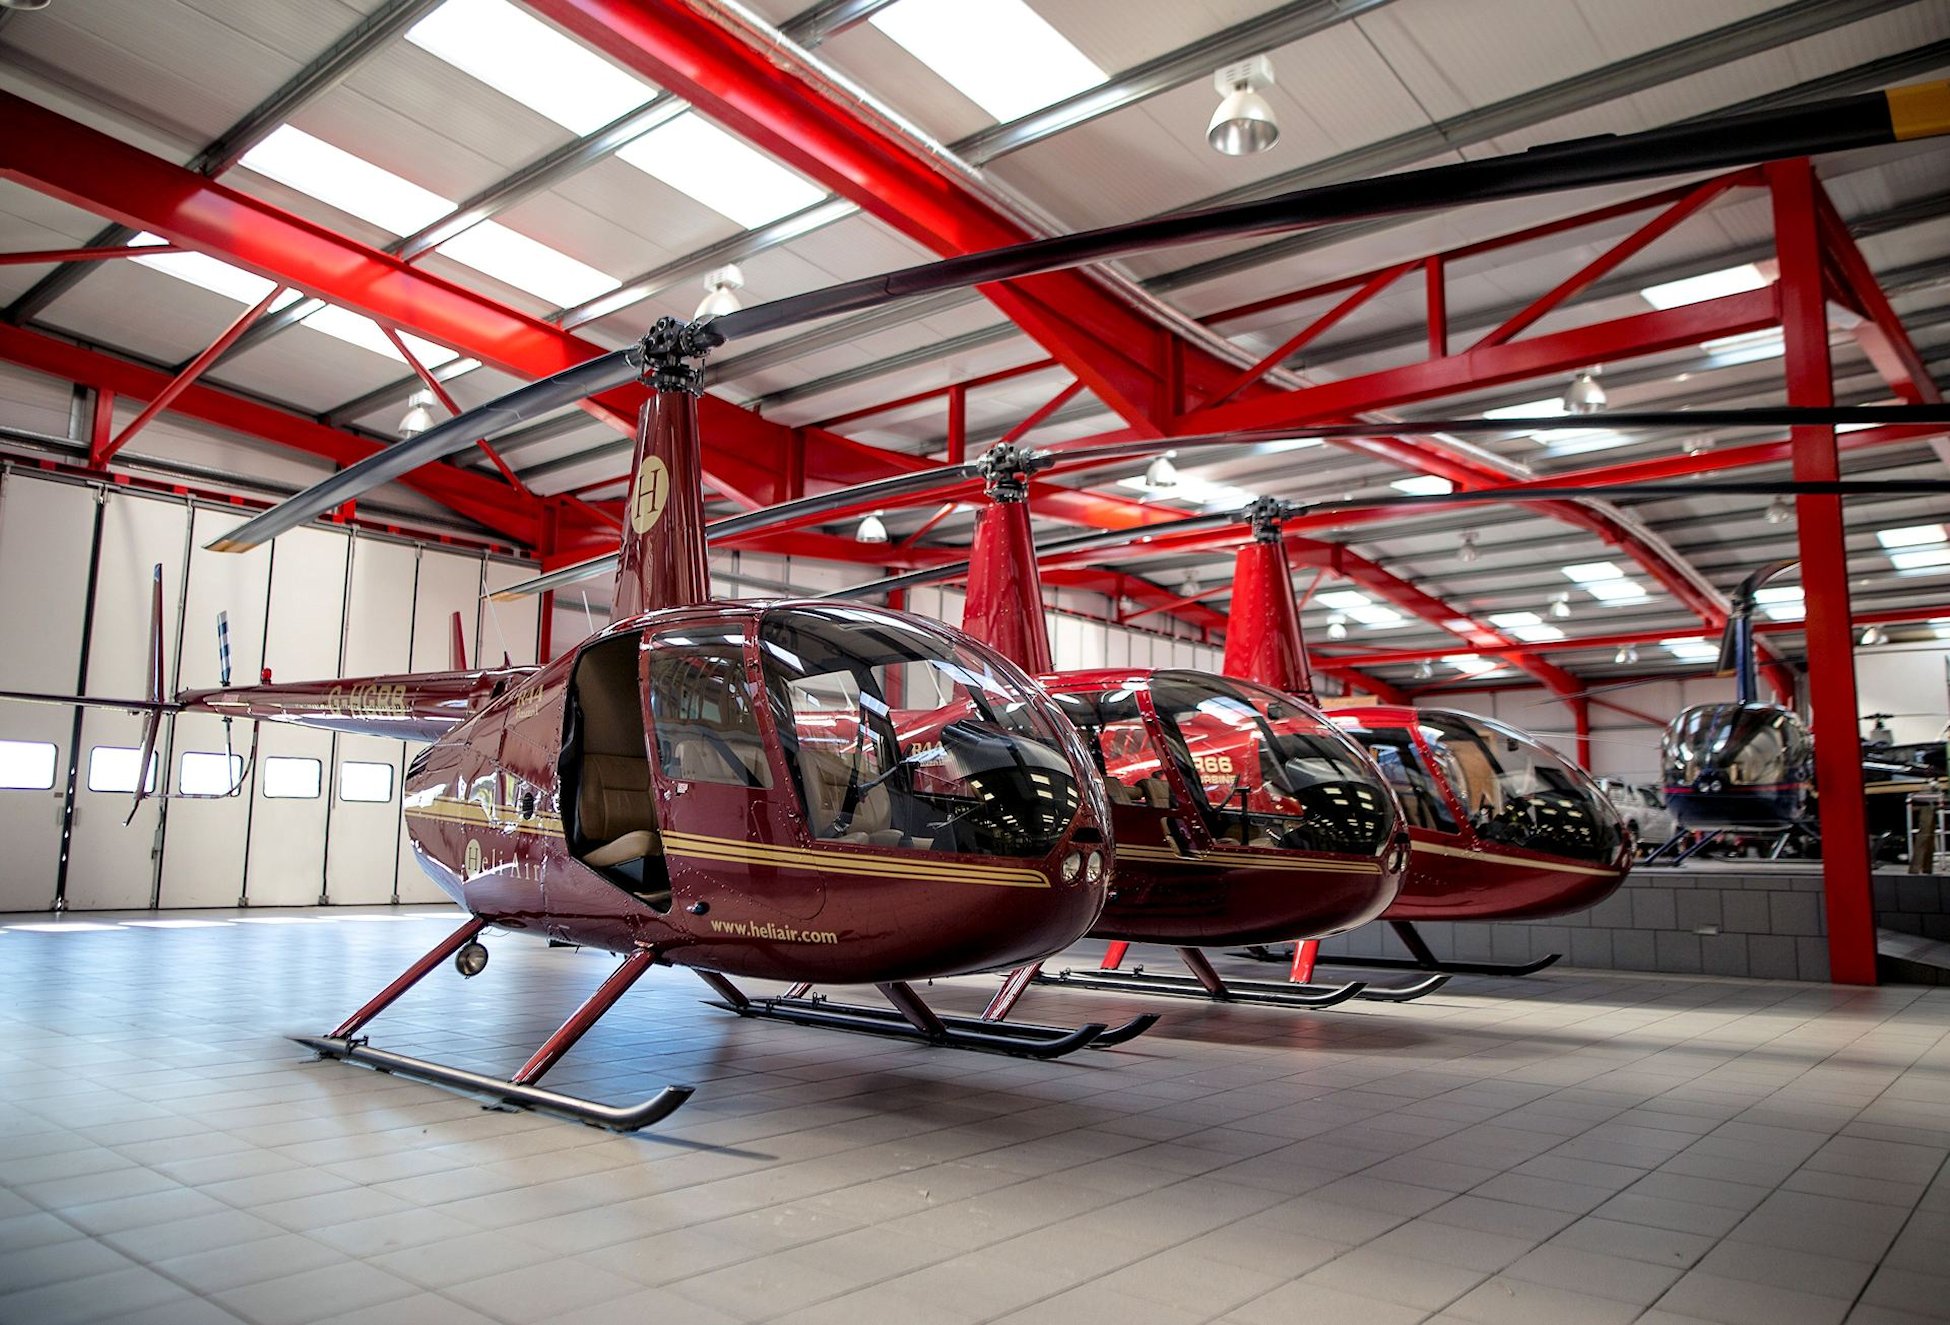 London High Wycombe Helicopter Training, Hangarage, Maintenance, Sales, Charter and hire